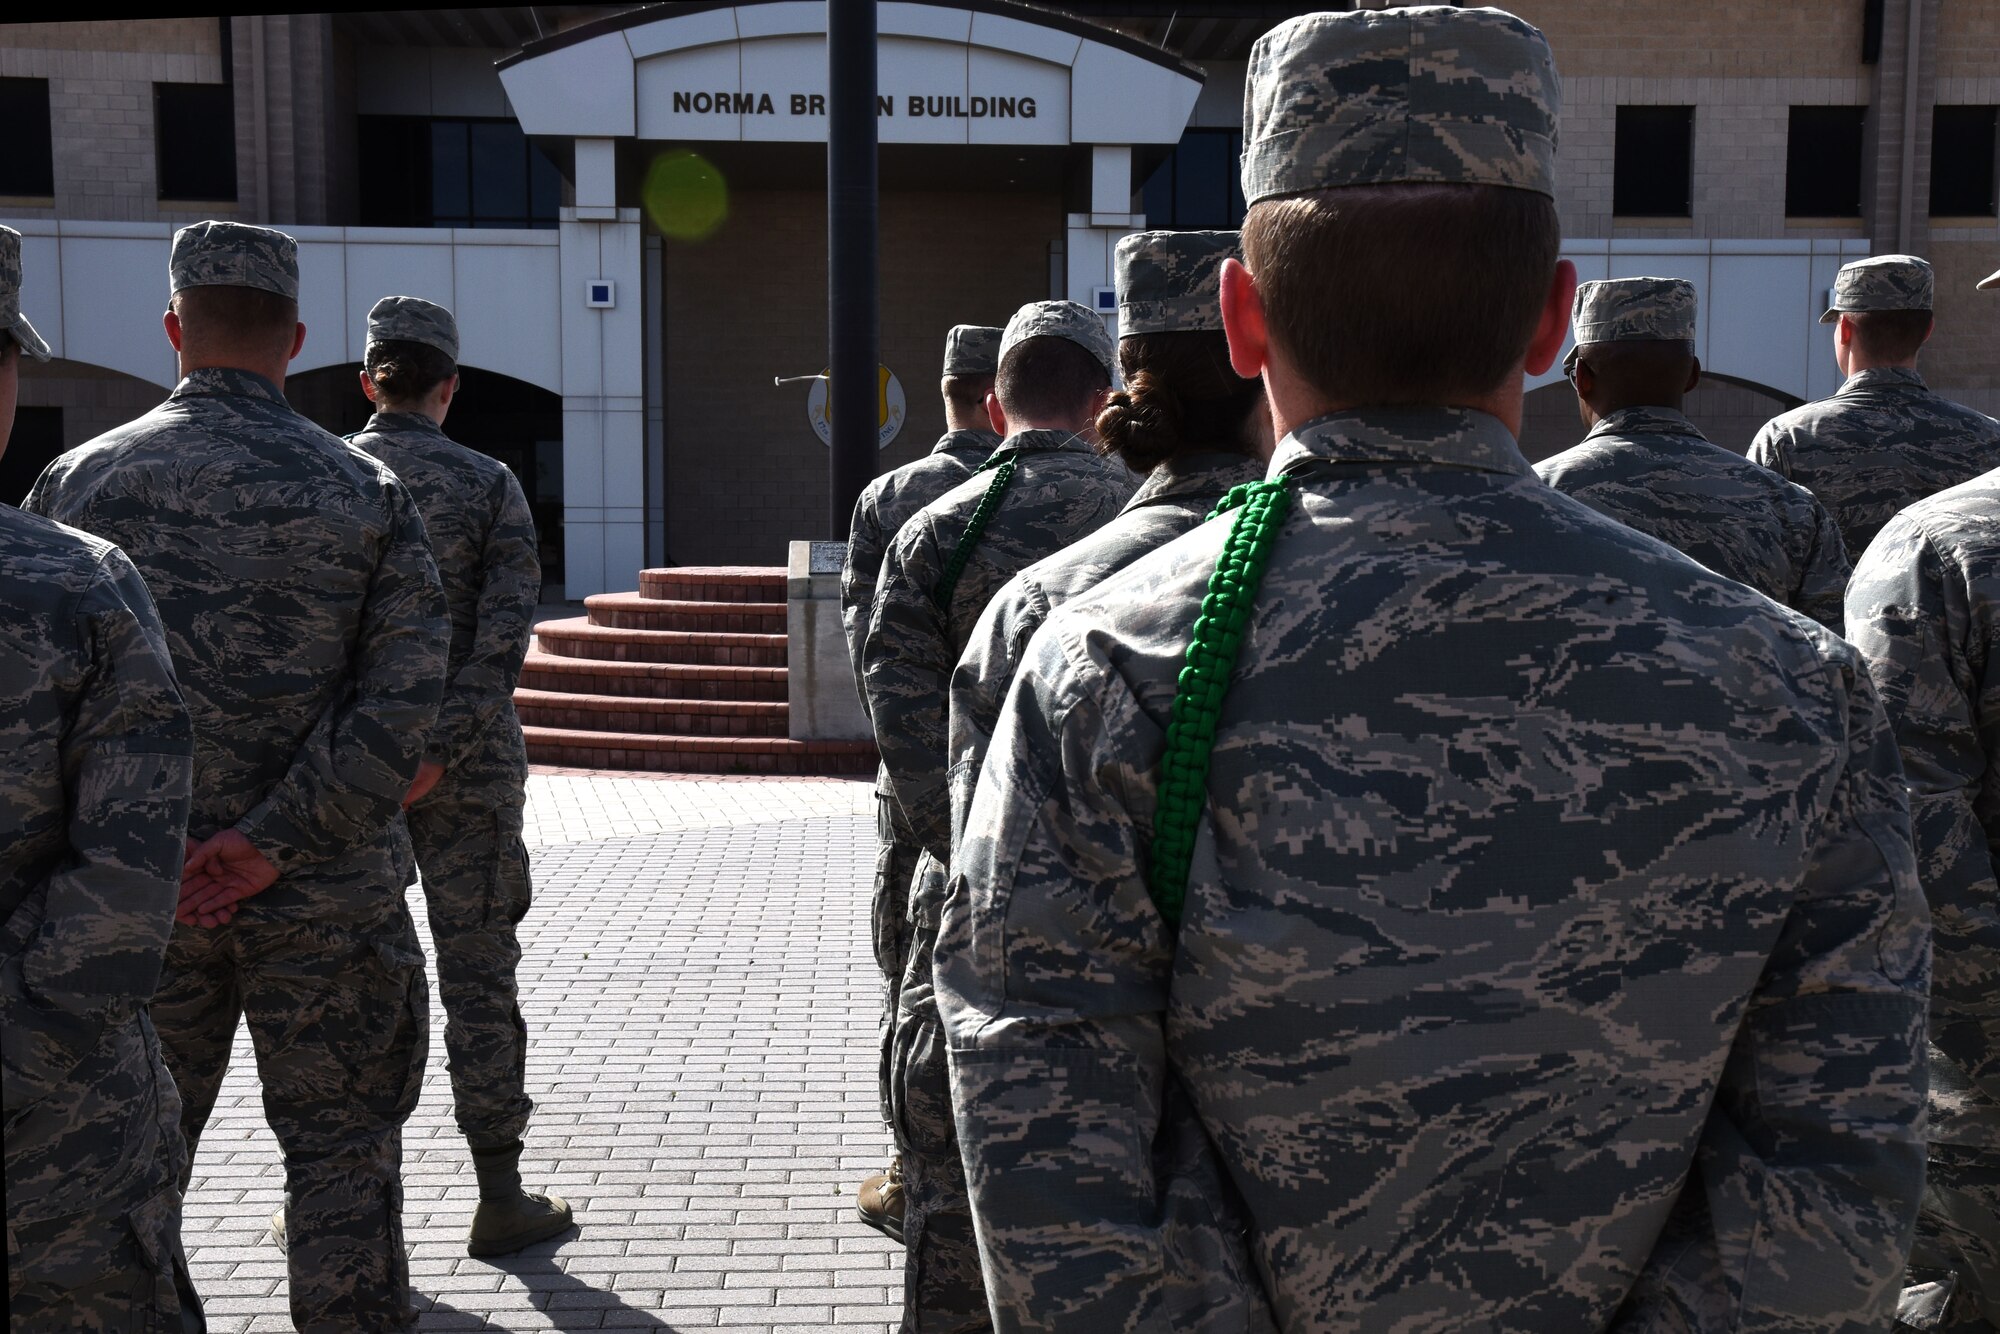 Goodfellow service members stand at parade rest, waiting for the flag to be lowered during the special retreat ceremony in honor of Women’s History Month at the Norma Brown Building on Goodfellow Air Force Base, Texas, March 16, 2018. This was one of several events being held around base throughout the month. (U.S. Air Force photo by Airman 1st Class Seraiah Hines/Released)